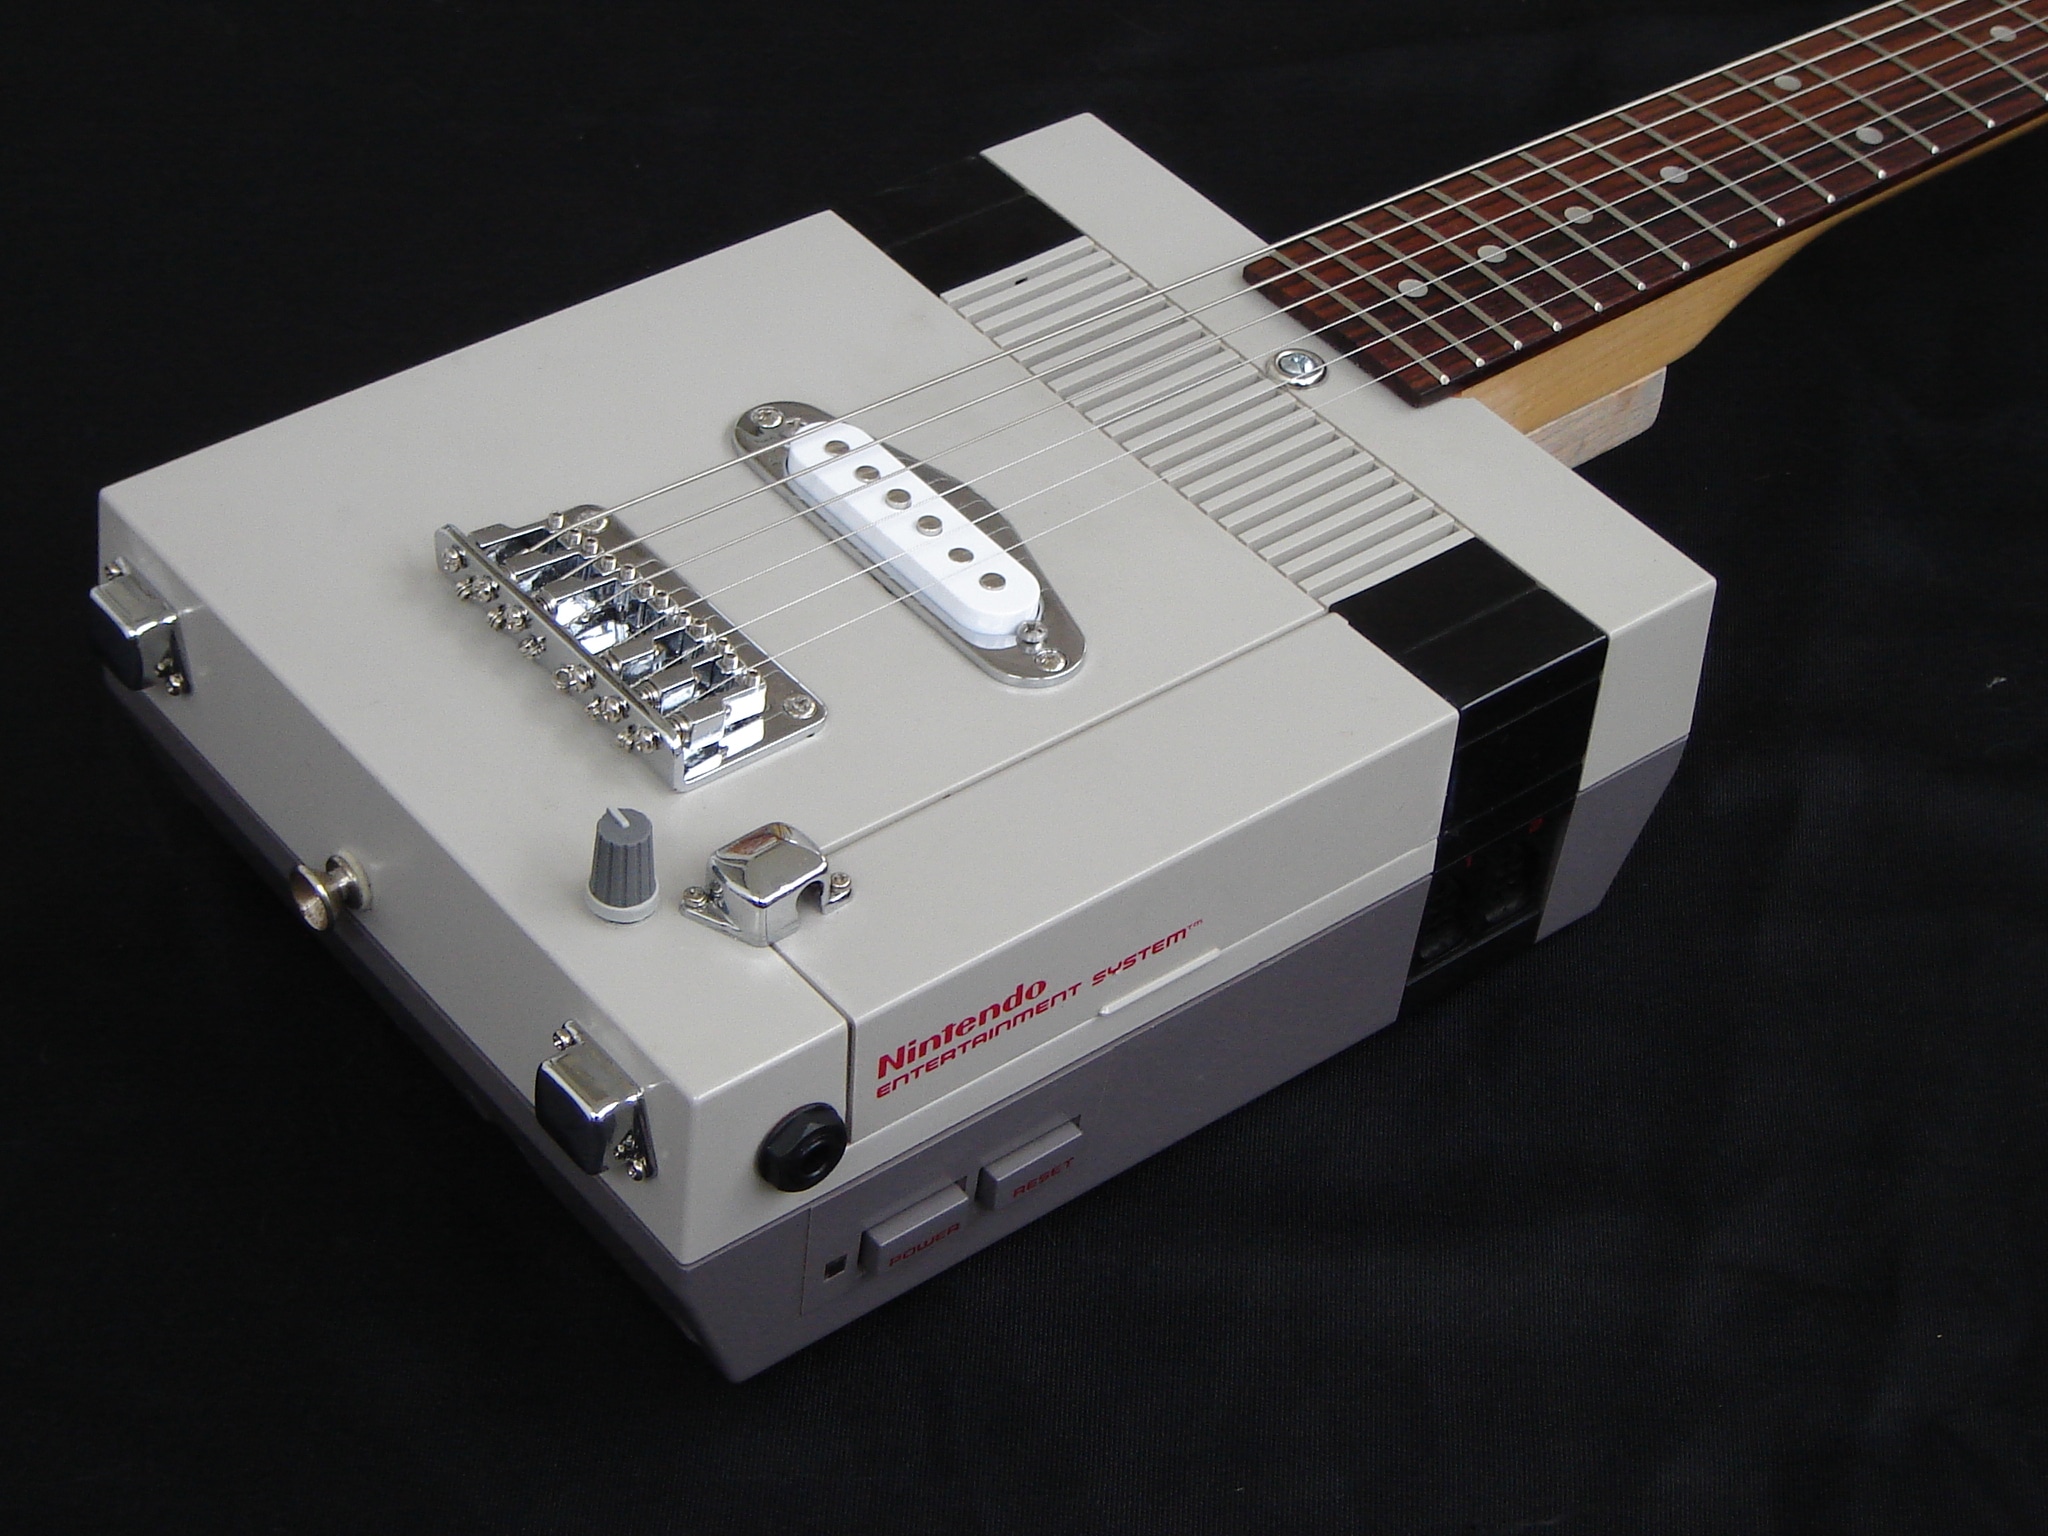 Nintendo NES Guitar: It Doesn’t Get Much More Old School